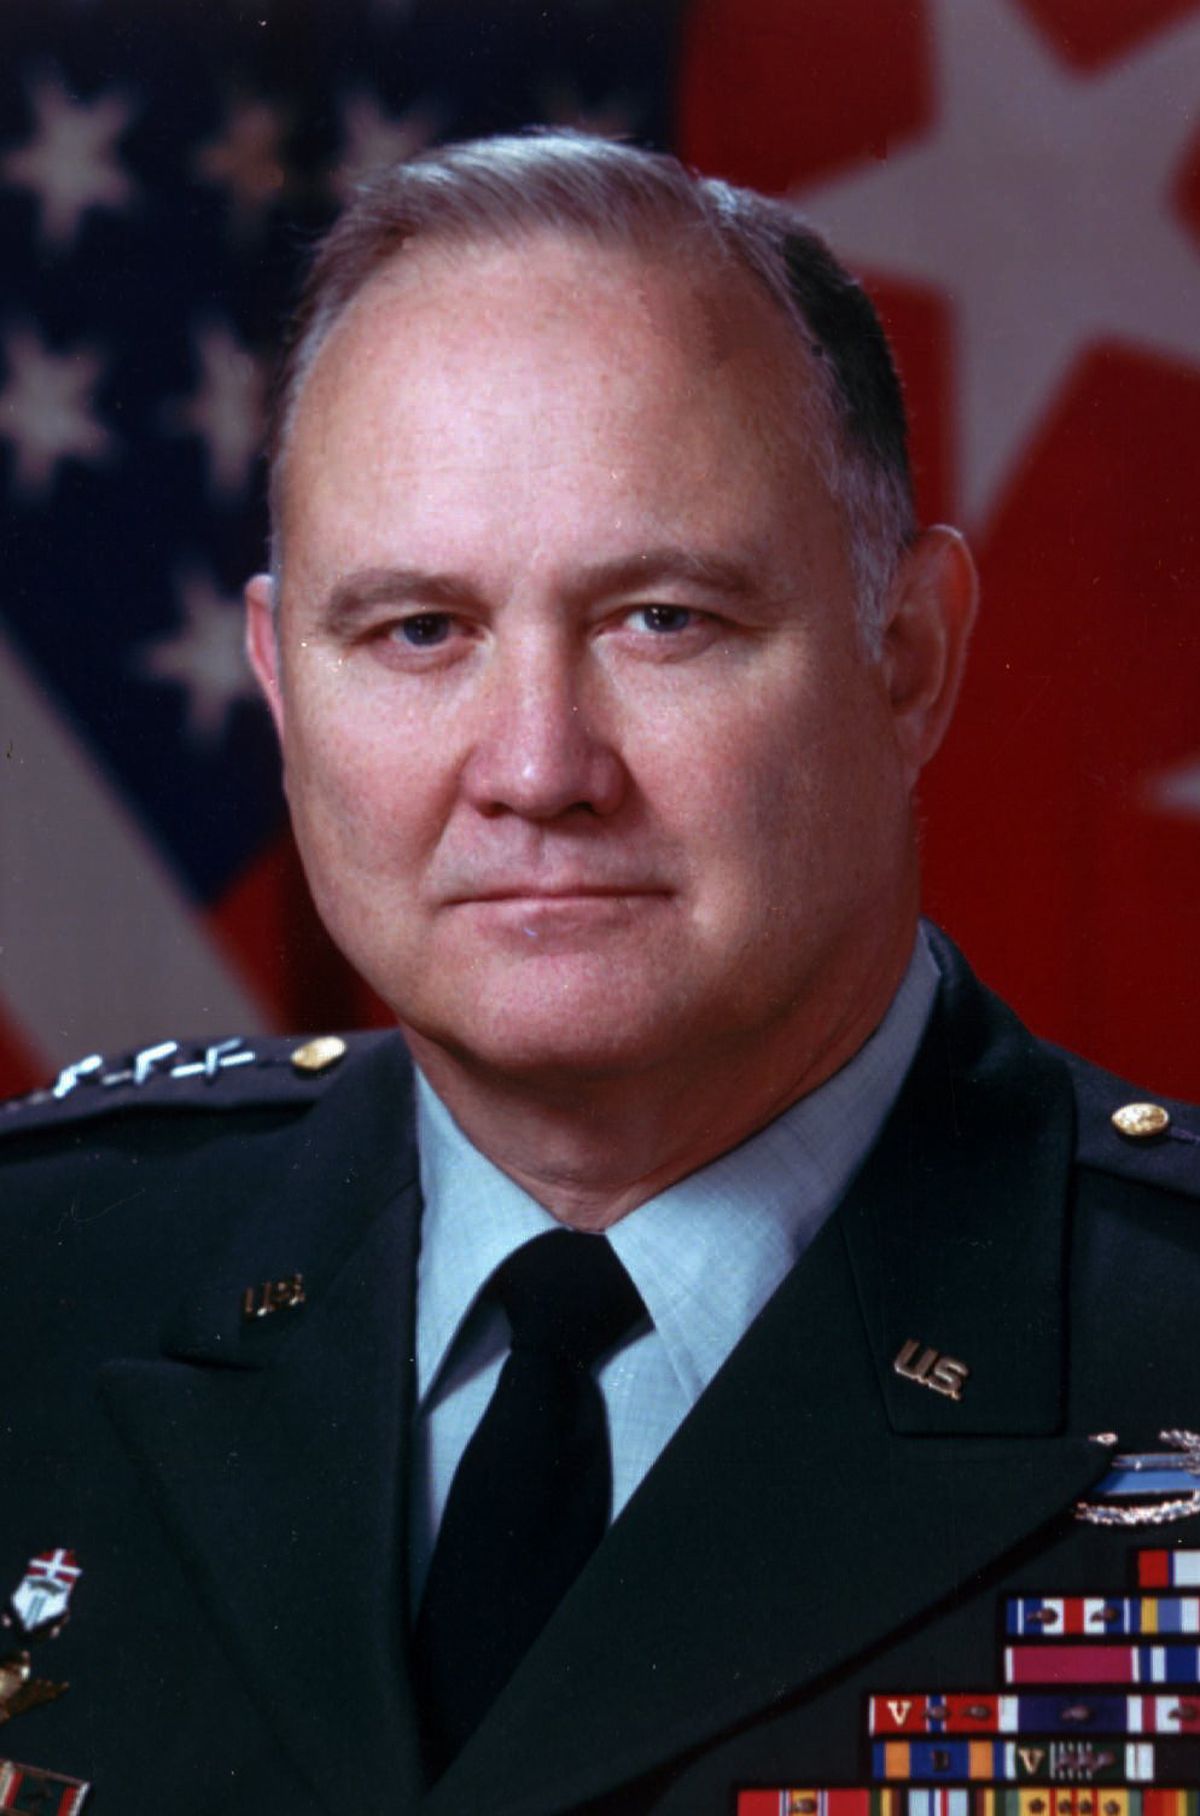 Schwarzkopf led the coalition that drove Iraqi forces out of Kuwait.